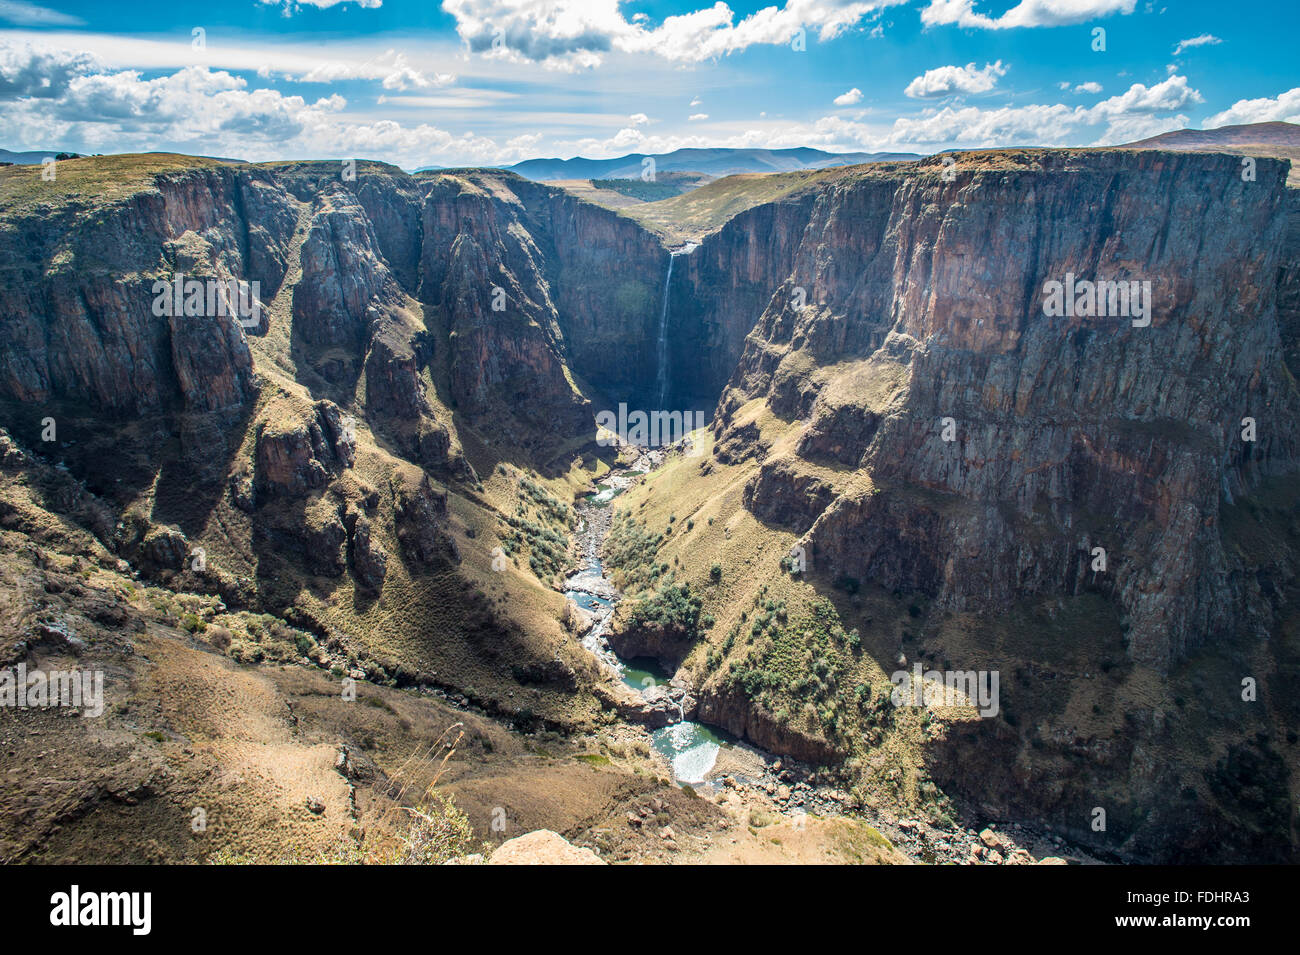 Aerial view of Maletsunyane Falls in Lesotho, Africa Stock Photo